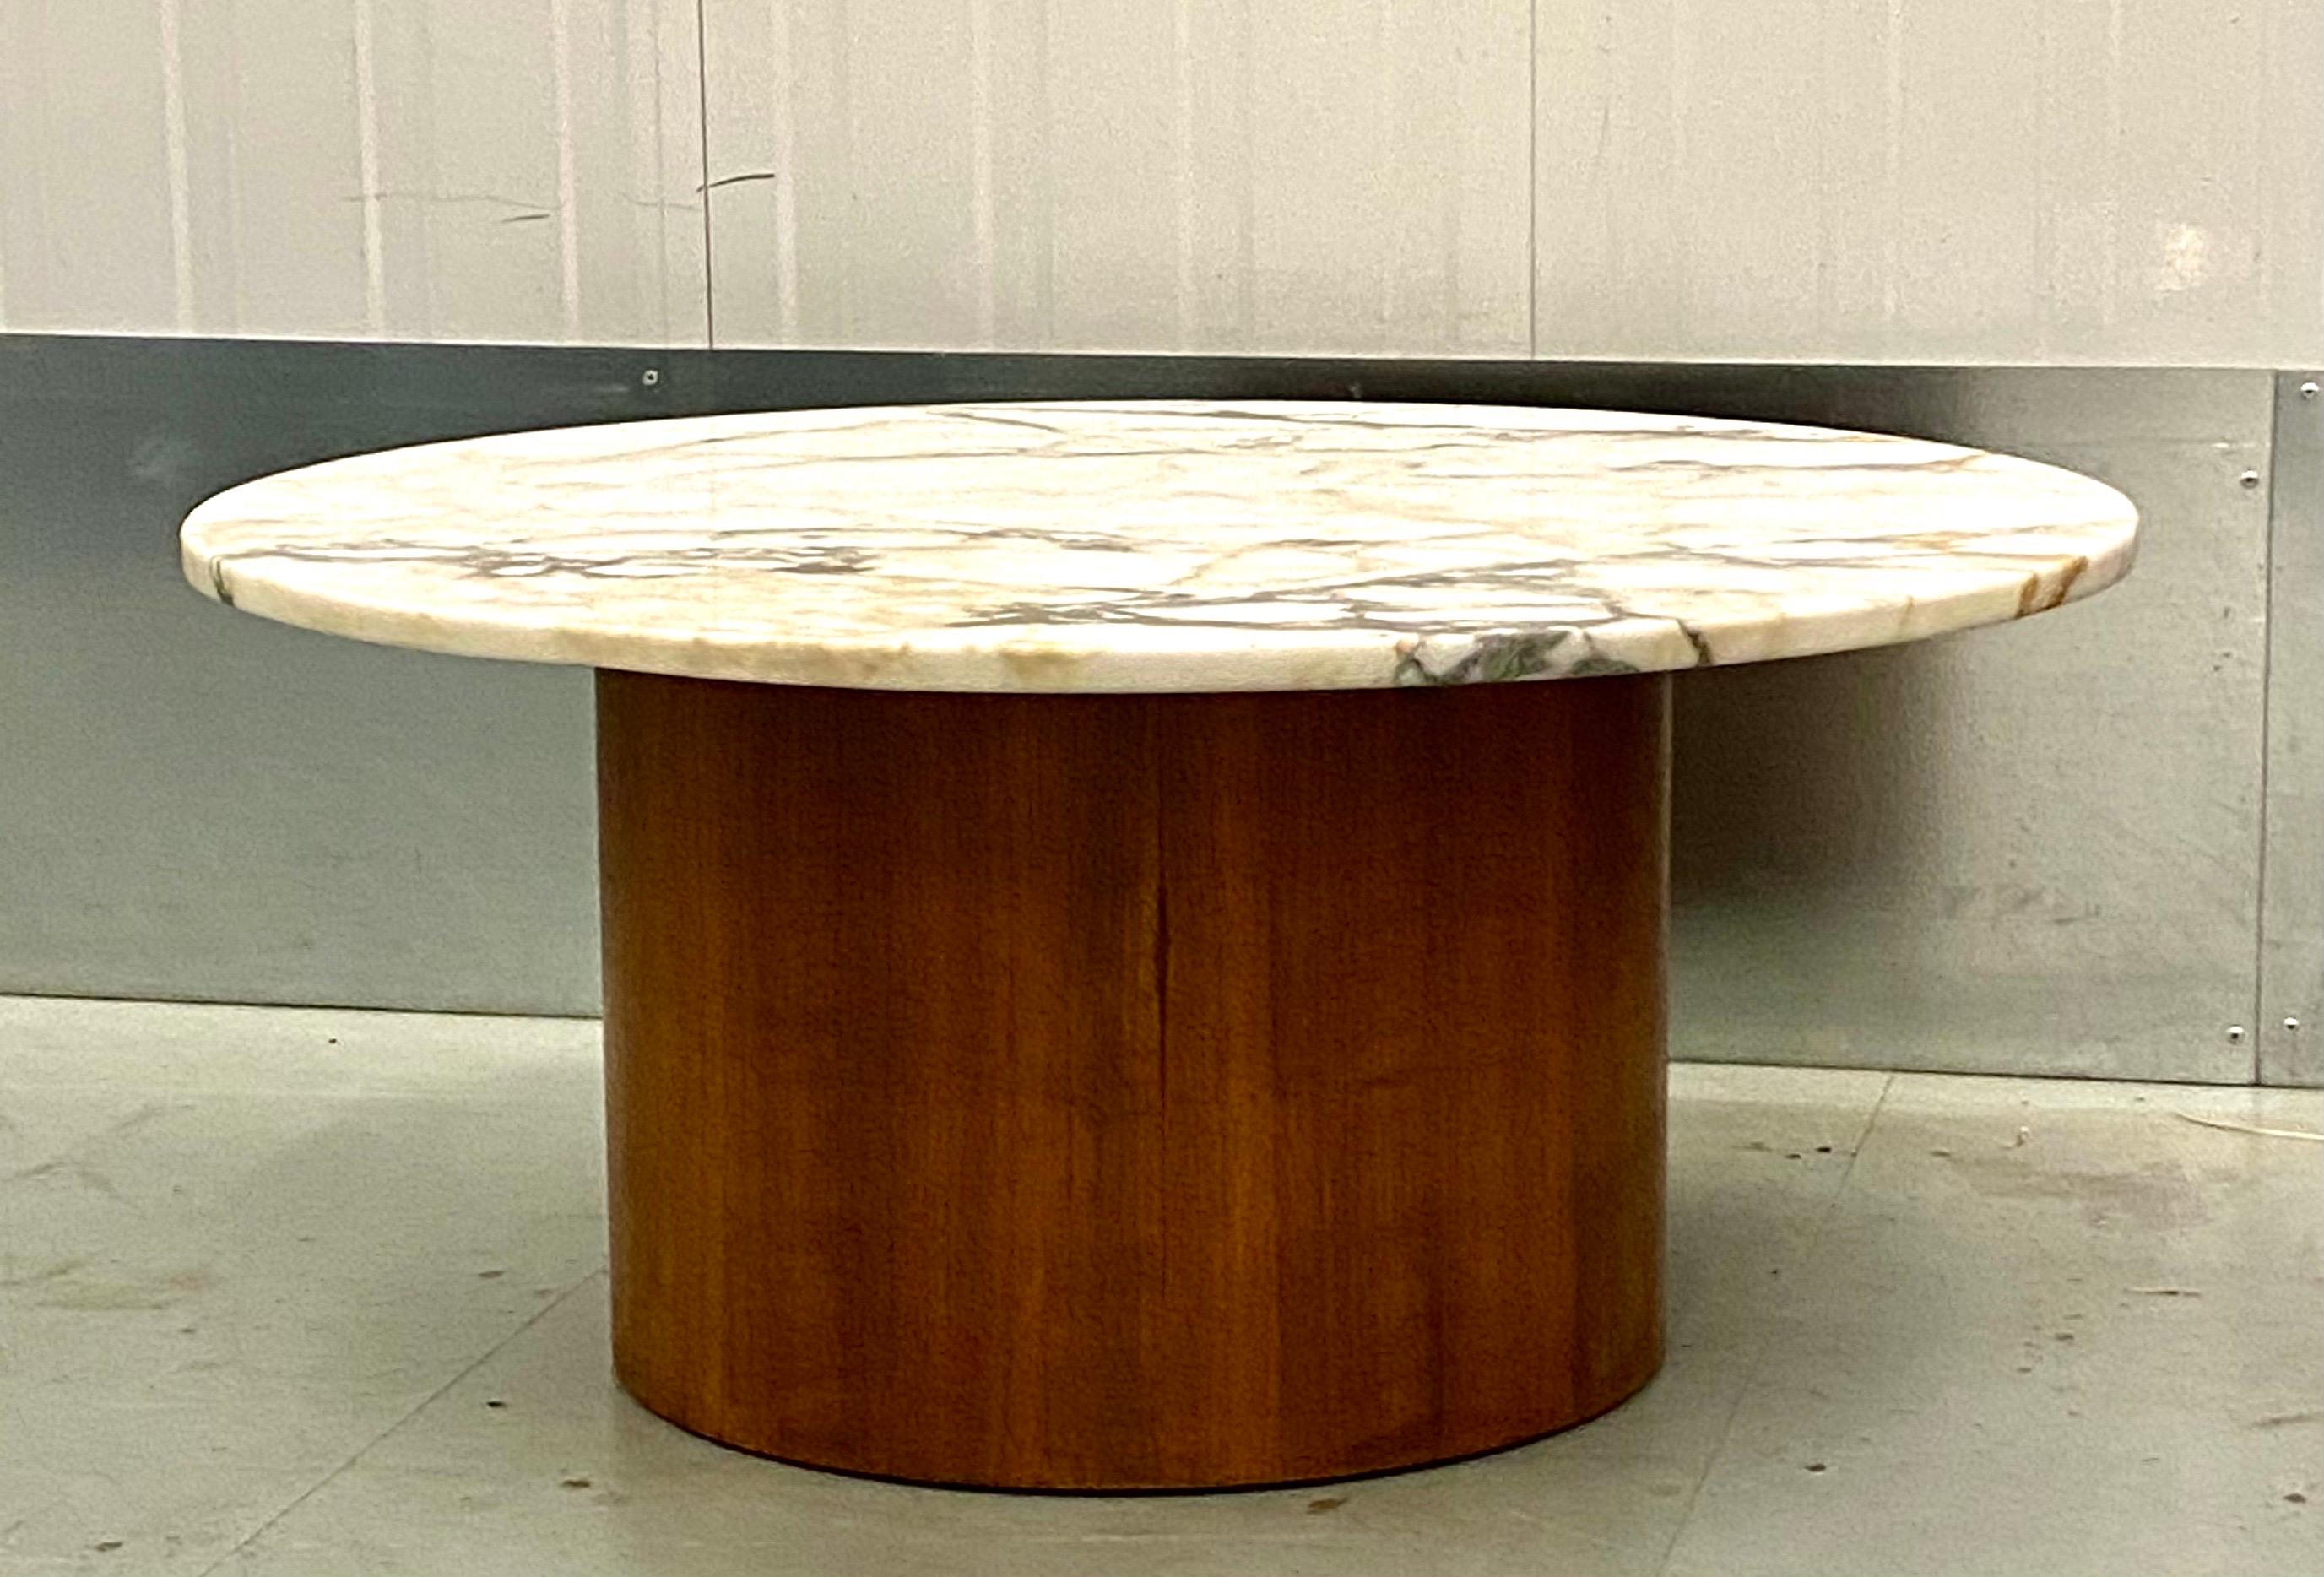 Stylish Mid-Century Modern teak & marble top round coffee table Circa 1970's.
The base is a well streaky grained teak wood that is very solid. A robust table base that is sturdy
enough to accommodate the heavy 1.4 inch thick round marble top. This